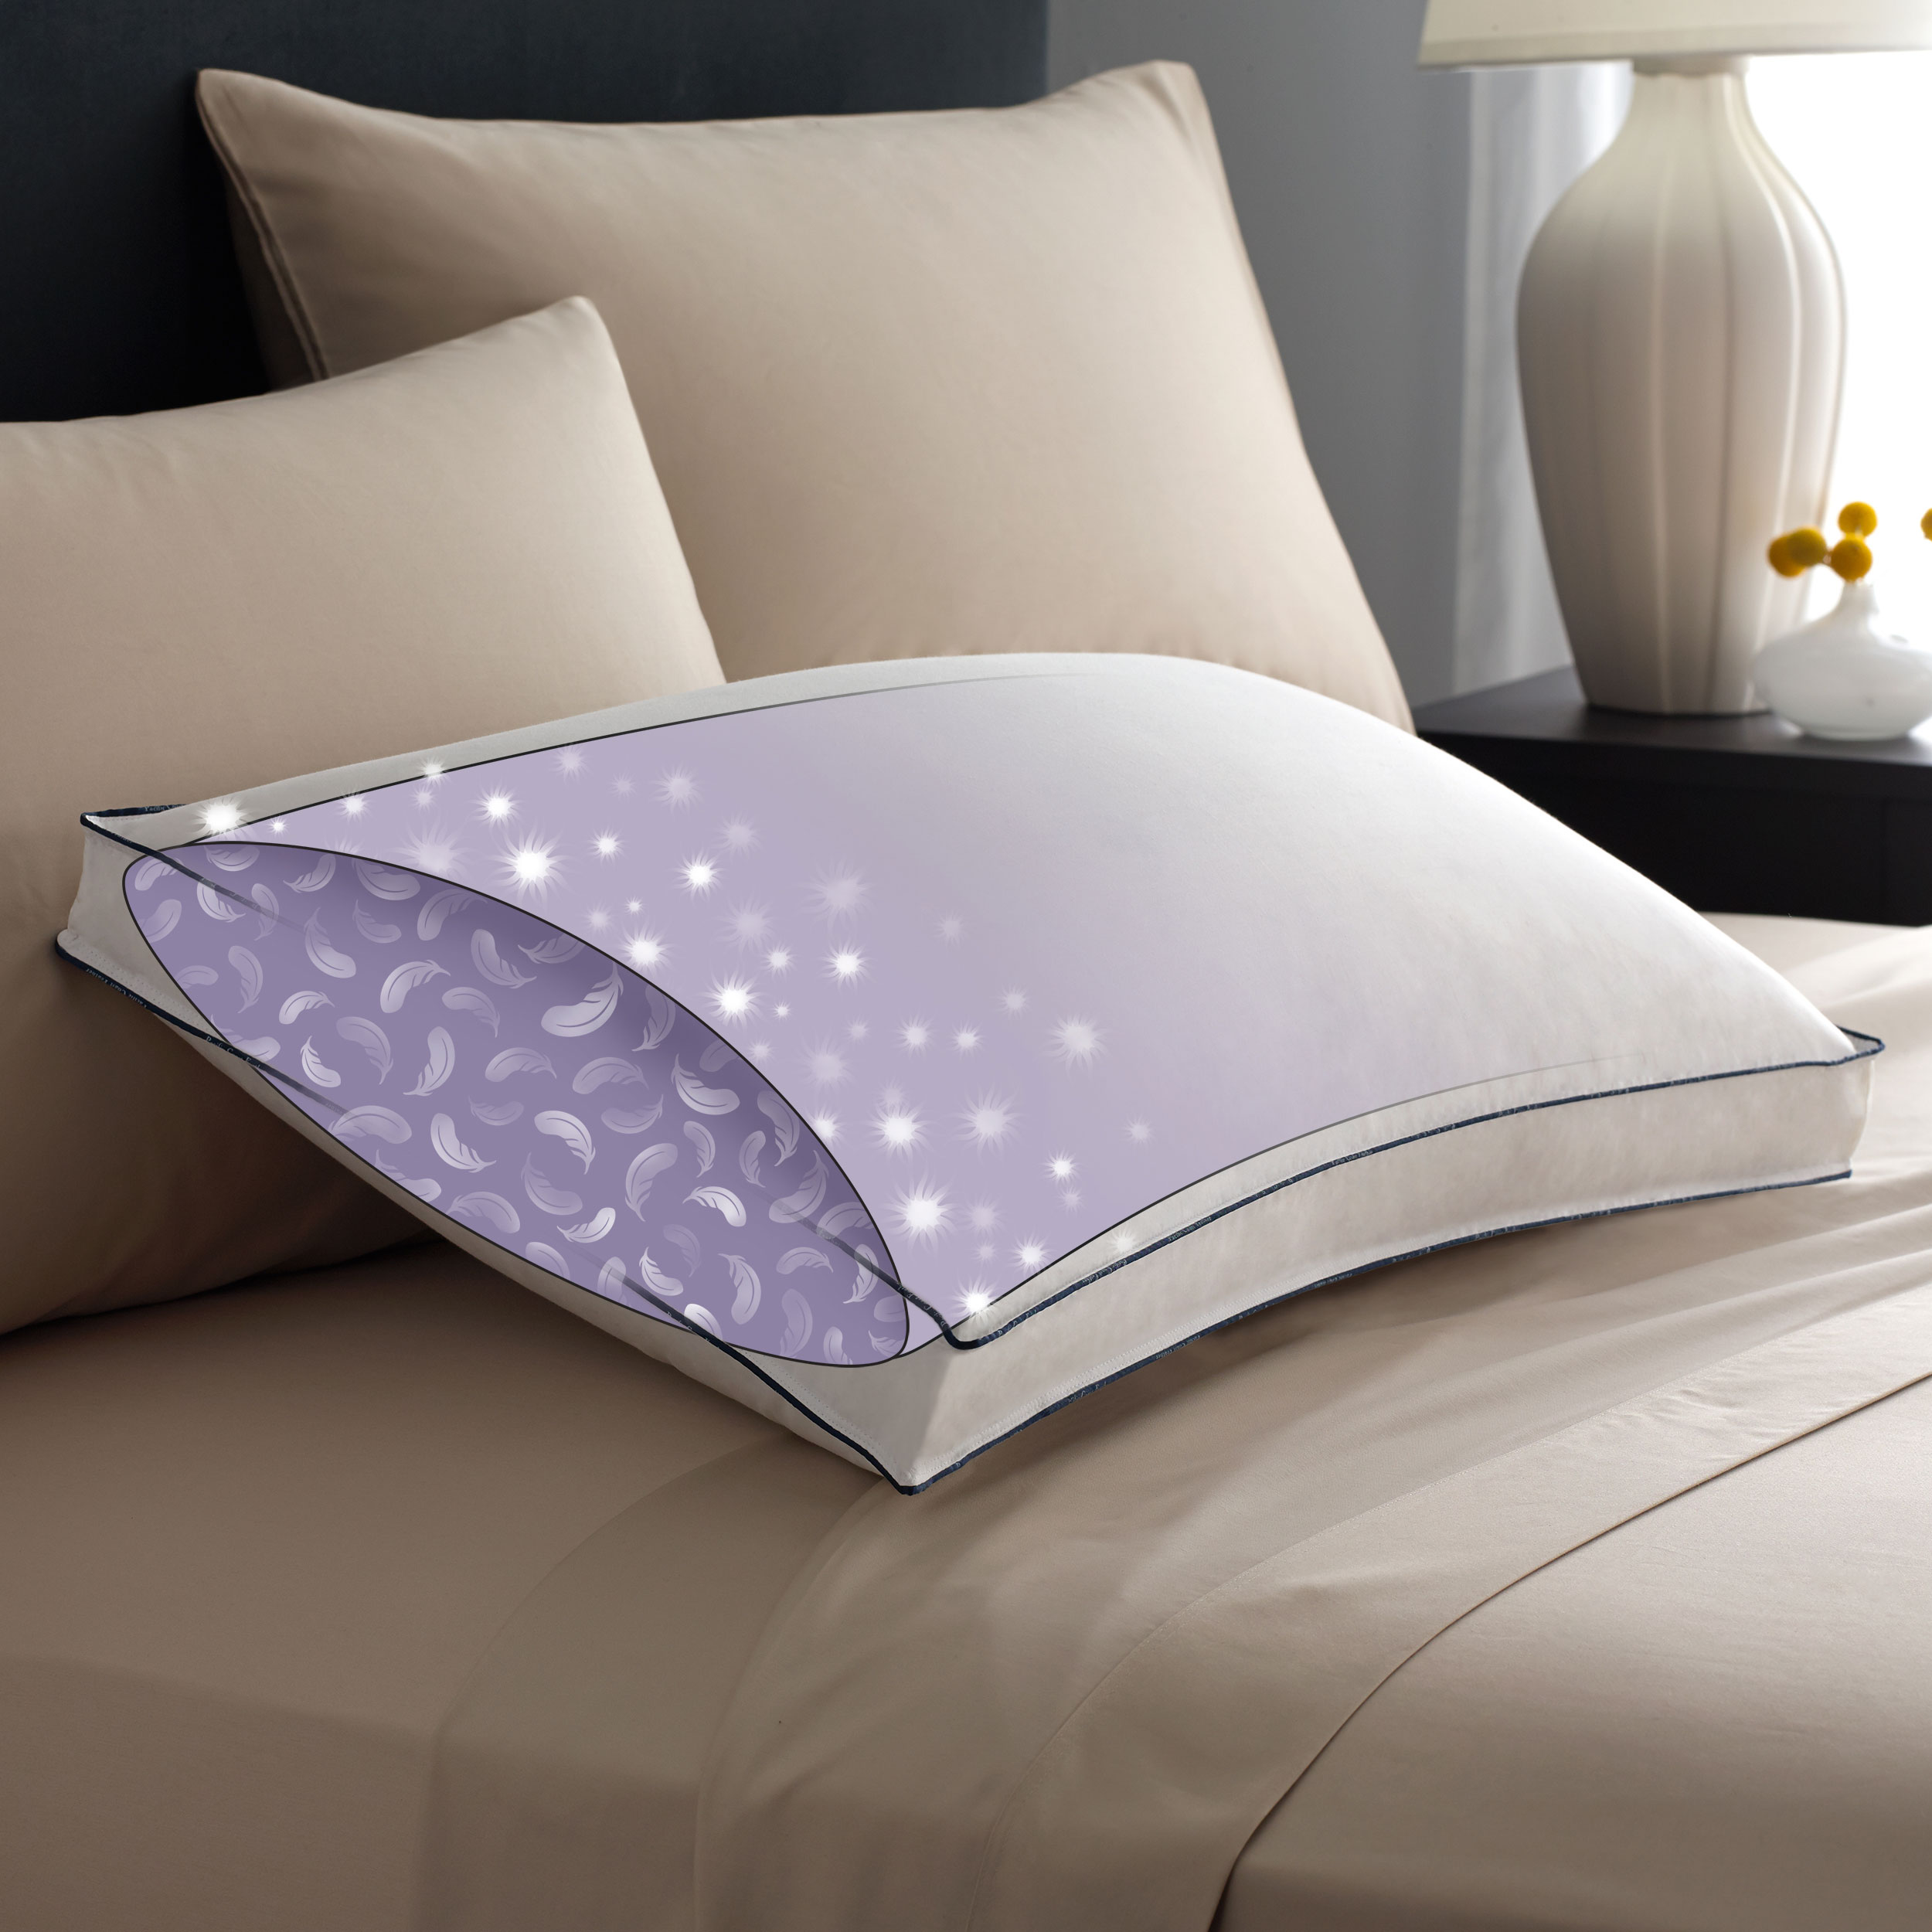 Pacific Coast Double Downaround Firm Pillow 300 Thread Count 550 Fill Power Down & Resilia Feathers - King